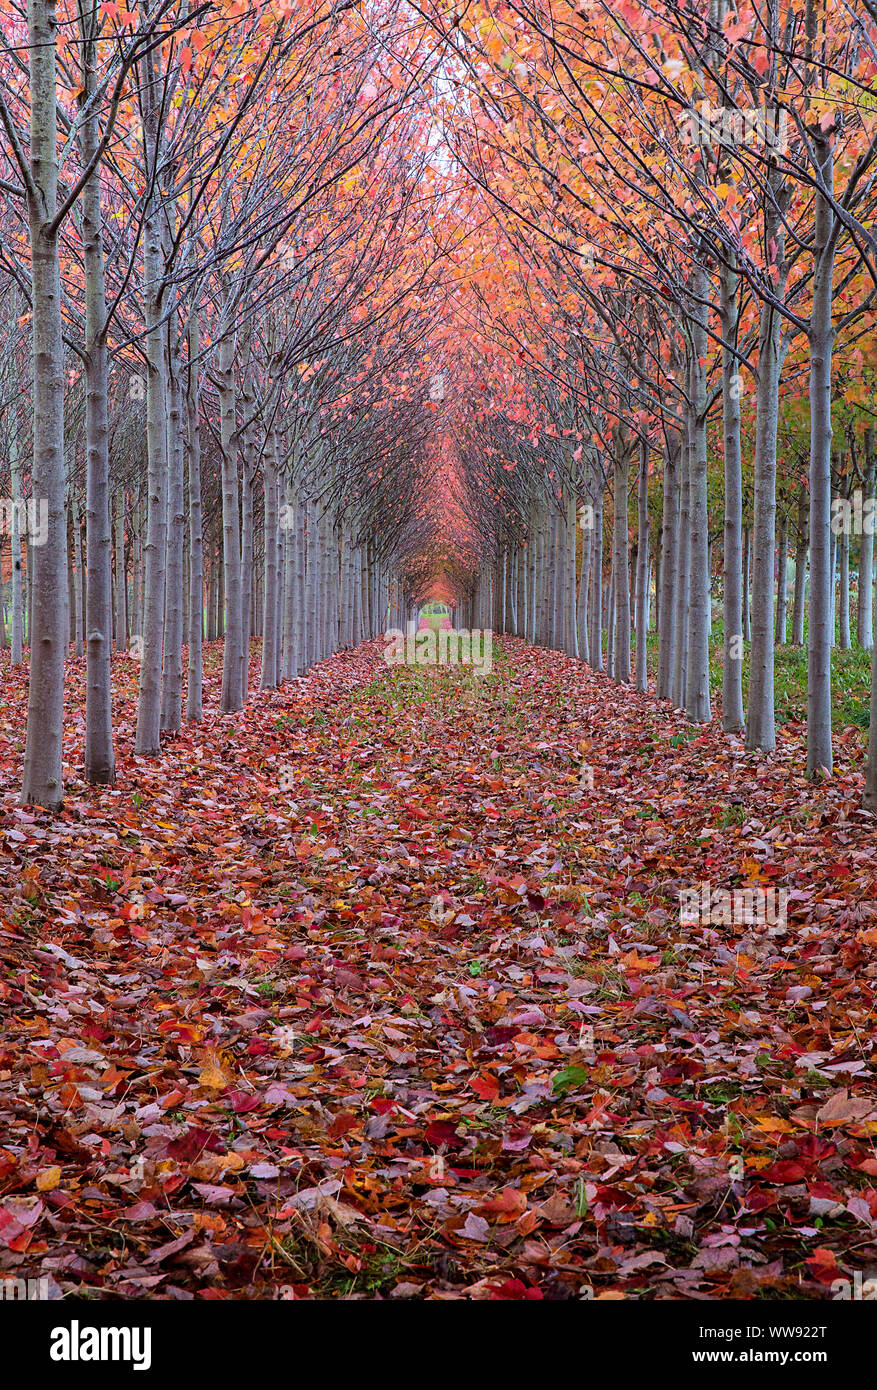 Fall color lines the path through rows of trees. Vanishing point and colorful autumn leaves. Leaf peeping in a tunnel of trees with autumn color. Stock Photo